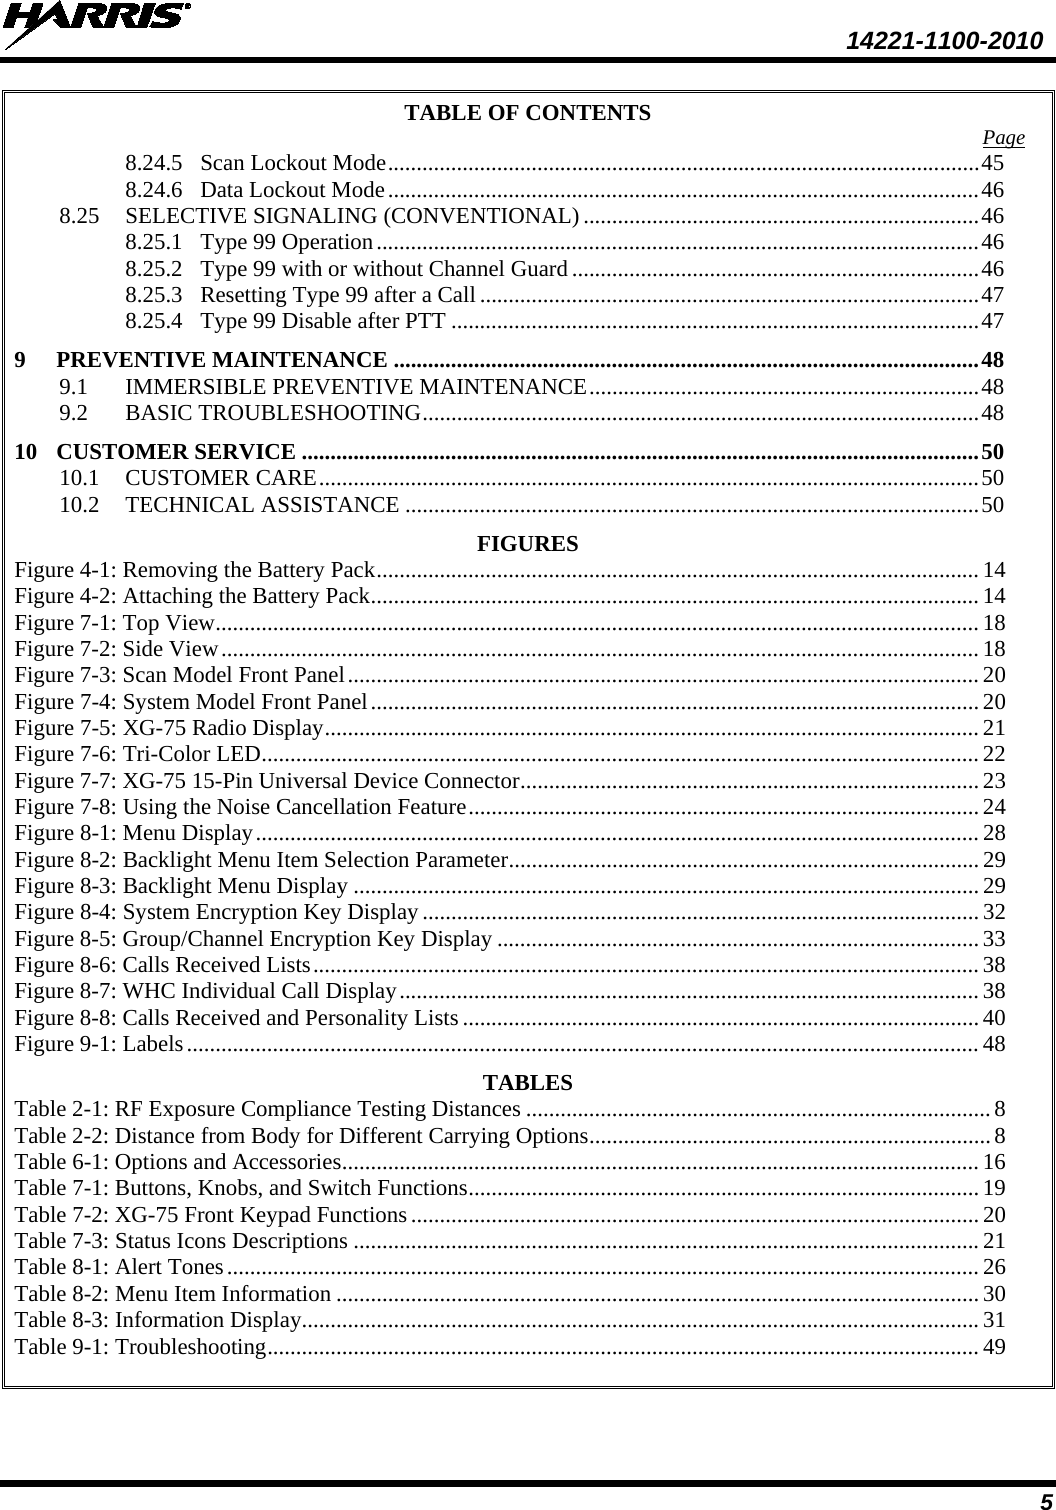  14221-1100-2010 5 TABLE OF CONTENTS Page 8.24.5 Scan Lockout Mode ....................................................................................................... 45 8.24.6 Data Lockout Mode ....................................................................................................... 46 8.25 SELECTIVE SIGNALING (CONVENTIONAL) ..................................................................... 46 8.25.1 Type 99 Operation ......................................................................................................... 46 8.25.2 Type 99 with or without Channel Guard ....................................................................... 46 8.25.3 Resetting Type 99 after a Call ....................................................................................... 47 8.25.4 Type 99 Disable after PTT ............................................................................................ 47 9 PREVENTIVE MAINTENANCE ...................................................................................................... 48 9.1 IMMERSIBLE PREVENTIVE MAINTENANCE .................................................................... 48 9.2 BASIC TROUBLESHOOTING ................................................................................................. 48 10 CUSTOMER SERVICE ...................................................................................................................... 50 10.1 CUSTOMER CARE ................................................................................................................... 50 10.2 TECHNICAL ASSISTANCE .................................................................................................... 50 FIGURES Figure 4-1: Removing the Battery Pack ......................................................................................................... 14 Figure 4-2: Attaching the Battery Pack .......................................................................................................... 14 Figure 7-1: Top View ..................................................................................................................................... 18 Figure 7-2: Side View .................................................................................................................................... 18 Figure 7-3: Scan Model Front Panel .............................................................................................................. 20 Figure 7-4: System Model Front Panel .......................................................................................................... 20 Figure 7-5: XG-75 Radio Display .................................................................................................................. 21 Figure 7-6: Tri-Color LED ............................................................................................................................. 22 Figure 7-7: XG-75 15-Pin Universal Device Connector ................................................................................ 23 Figure 7-8: Using the Noise Cancellation Feature ......................................................................................... 24 Figure 8-1: Menu Display .............................................................................................................................. 28 Figure 8-2: Backlight Menu Item Selection Parameter .................................................................................. 29 Figure 8-3: Backlight Menu Display ............................................................................................................. 29 Figure 8-4: System Encryption Key Display ................................................................................................. 32 Figure 8-5: Group/Channel Encryption Key Display .................................................................................... 33 Figure 8-6: Calls Received Lists .................................................................................................................... 38 Figure 8-7: WHC Individual Call Display ..................................................................................................... 38 Figure 8-8: Calls Received and Personality Lists .......................................................................................... 40 Figure 9-1: Labels .......................................................................................................................................... 48 TABLES Table 2-1: RF Exposure Compliance Testing Distances ................................................................................. 8 Table 2-2: Distance from Body for Different Carrying Options ...................................................................... 8 Table 6-1: Options and Accessories ............................................................................................................... 16 Table 7-1: Buttons, Knobs, and Switch Functions ......................................................................................... 19 Table 7-2: XG-75 Front Keypad Functions ................................................................................................... 20 Table 7-3: Status Icons Descriptions ............................................................................................................. 21 Table 8-1: Alert Tones ................................................................................................................................... 26 Table 8-2: Menu Item Information ................................................................................................................ 30 Table 8-3: Information Display ...................................................................................................................... 31 Table 9-1: Troubleshooting ............................................................................................................................ 49  